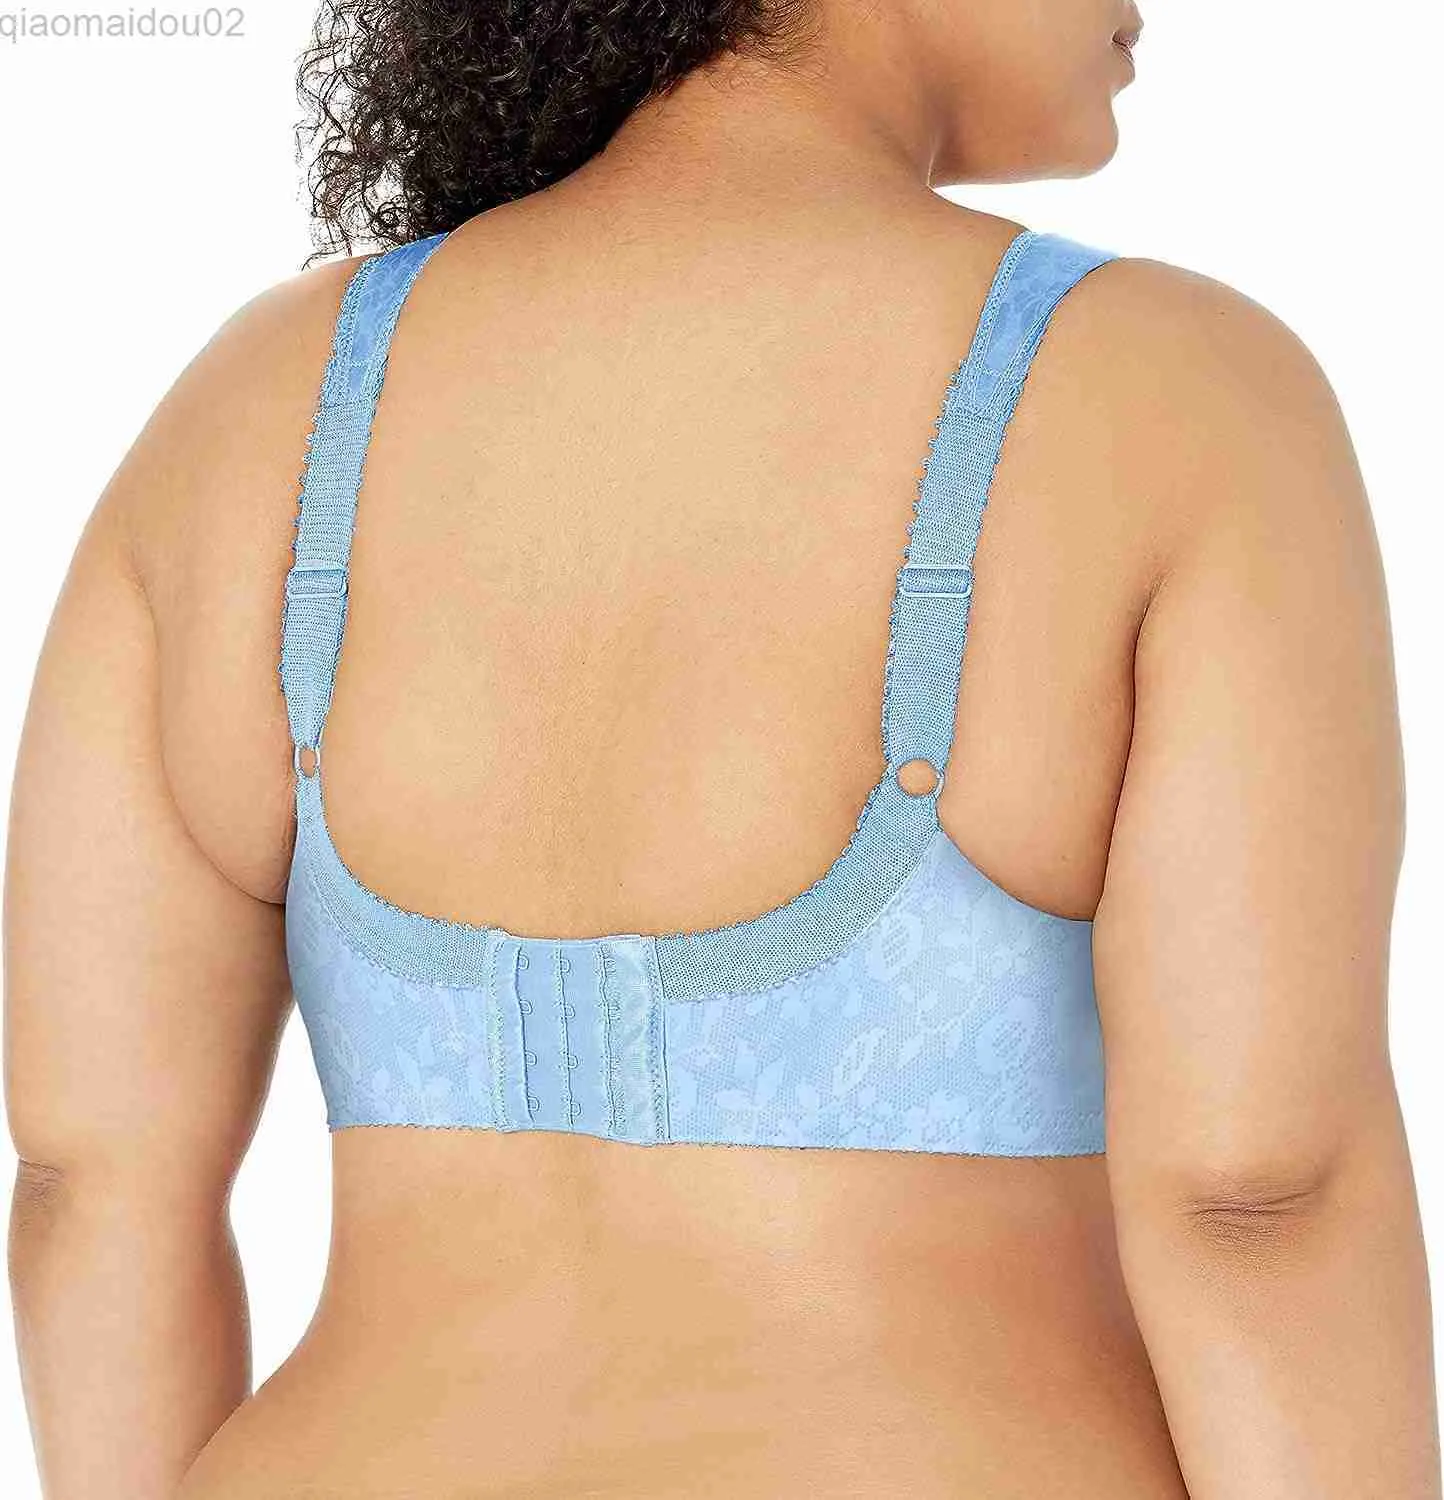 Bras Playtex Womens 18 Hour Comfort Strap Full Coverage Bra Without Steel  Rim With 4 Way TrusupportLF20230905 From Qiaomaidou02, $24.56